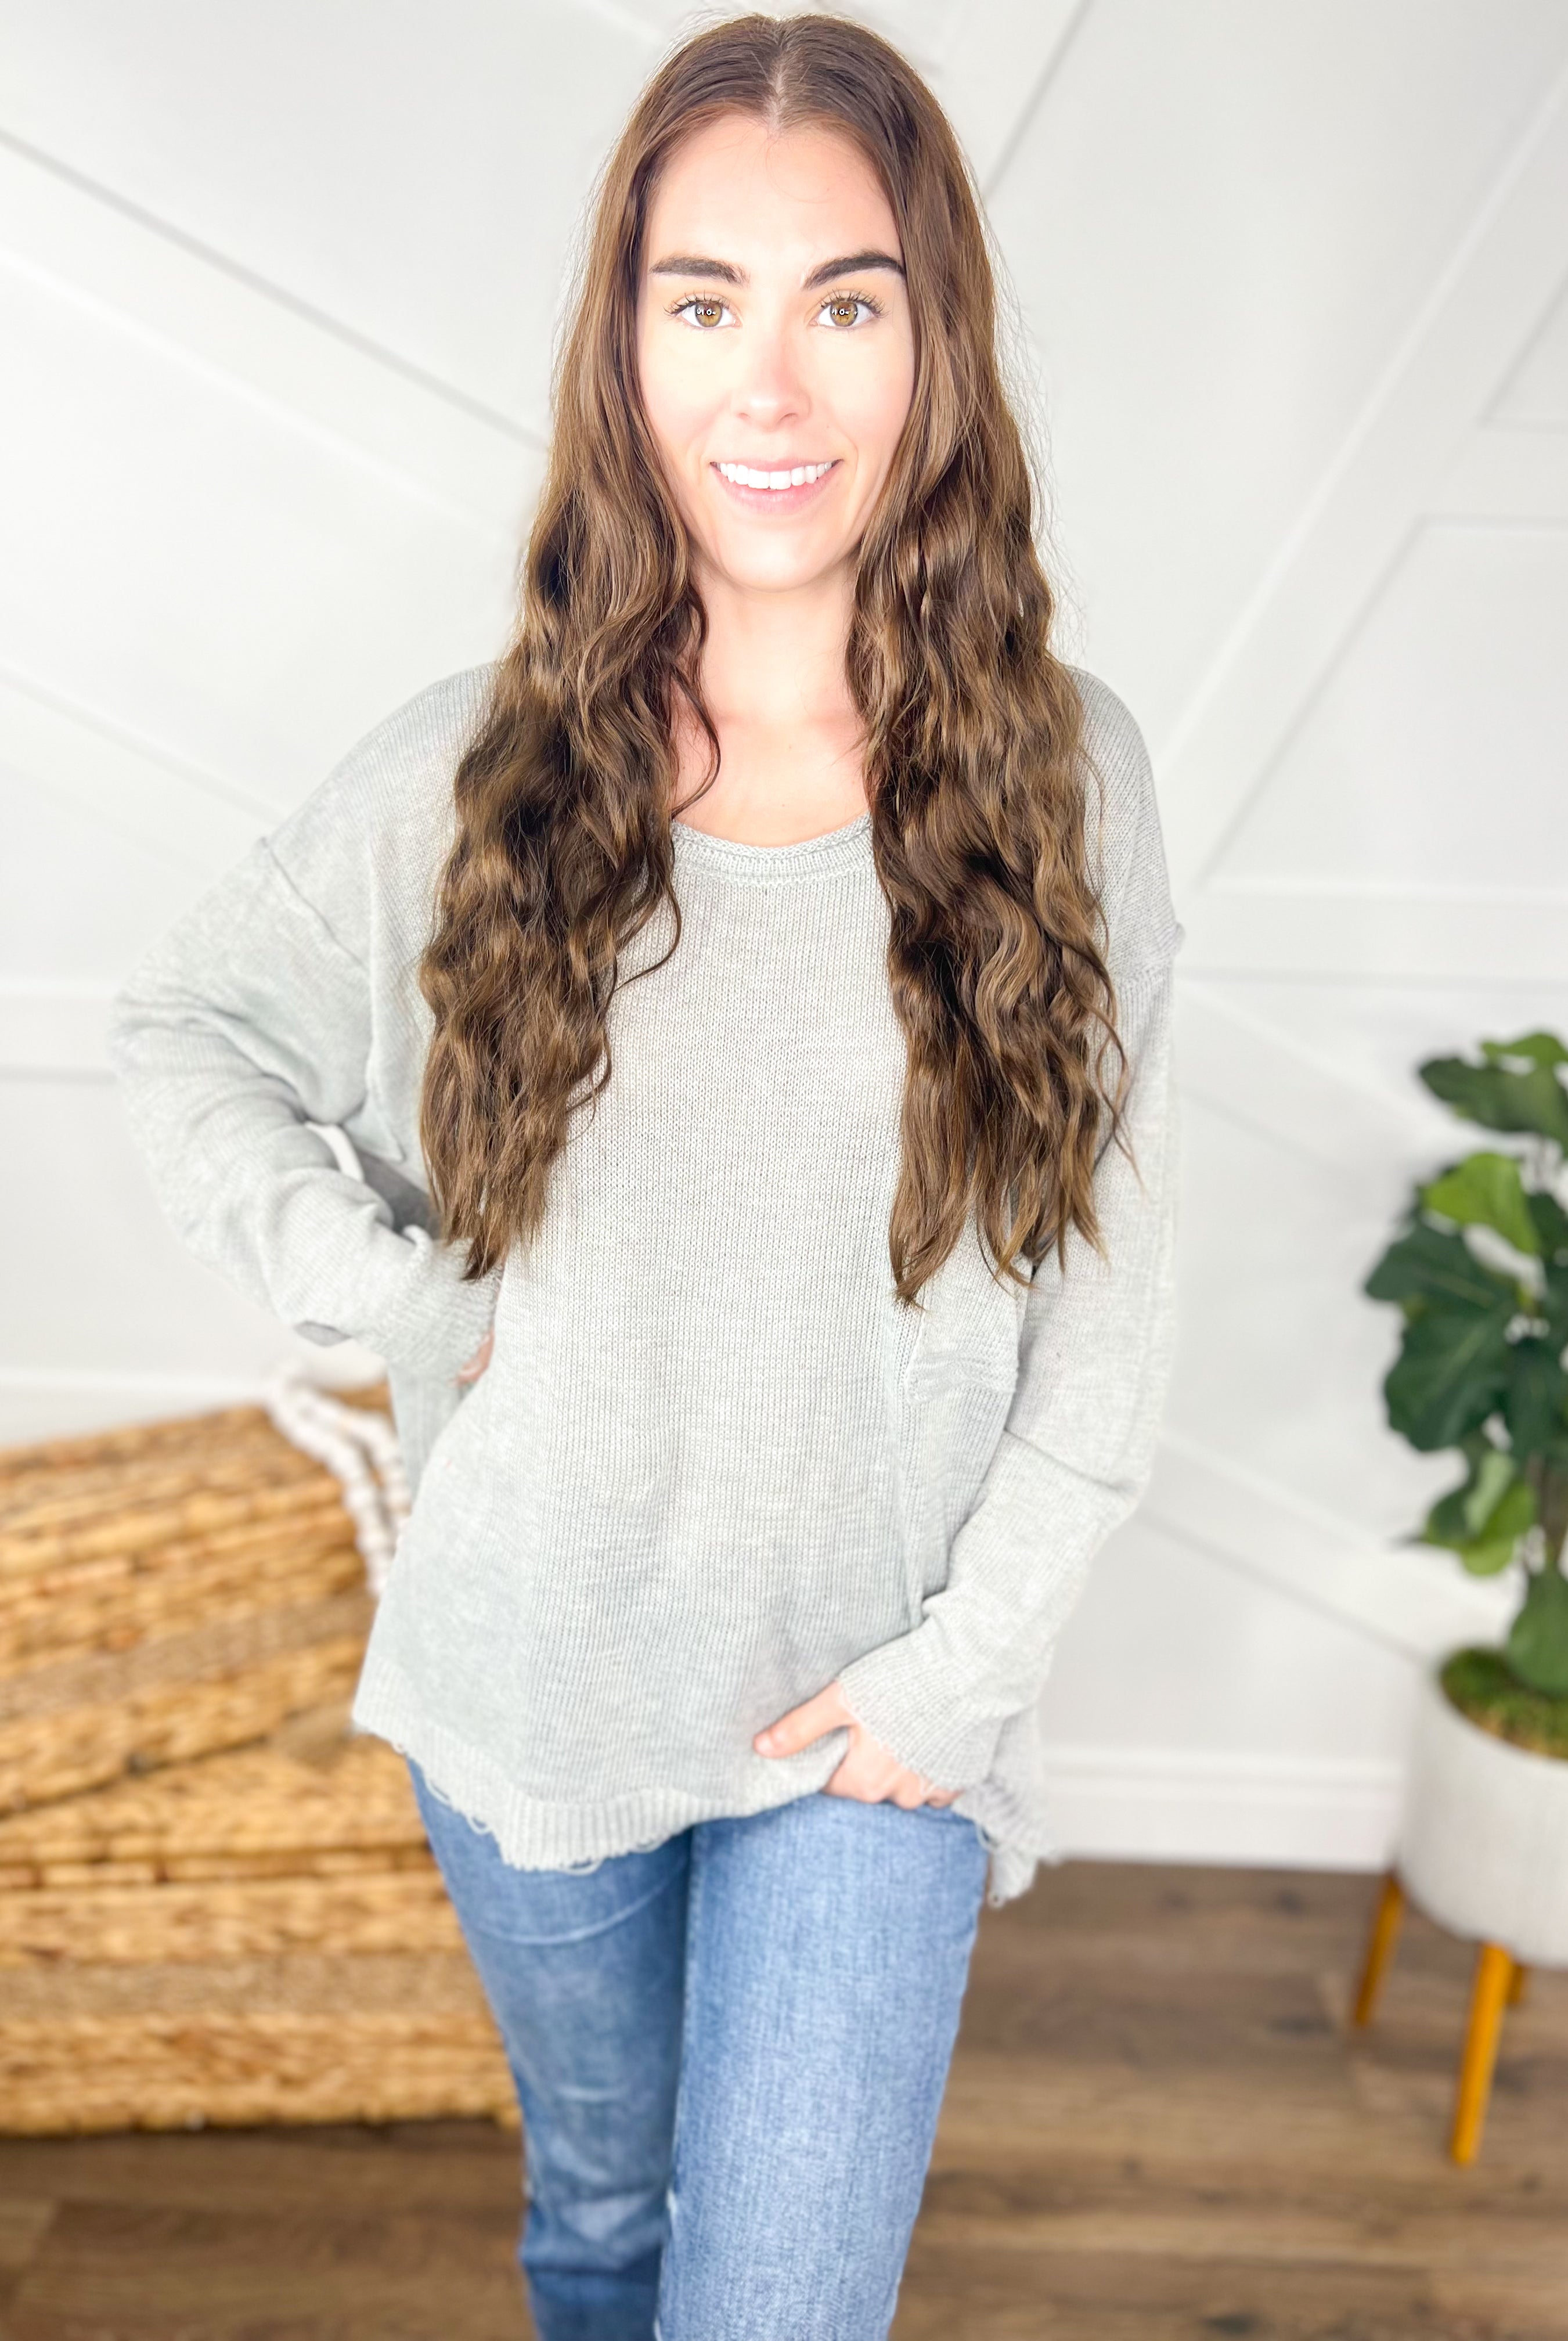 RESTOCK: Piece Of Me Sweater-125 Sweater-Easel-Heathered Boho Boutique, Women's Fashion and Accessories in Palmetto, FL